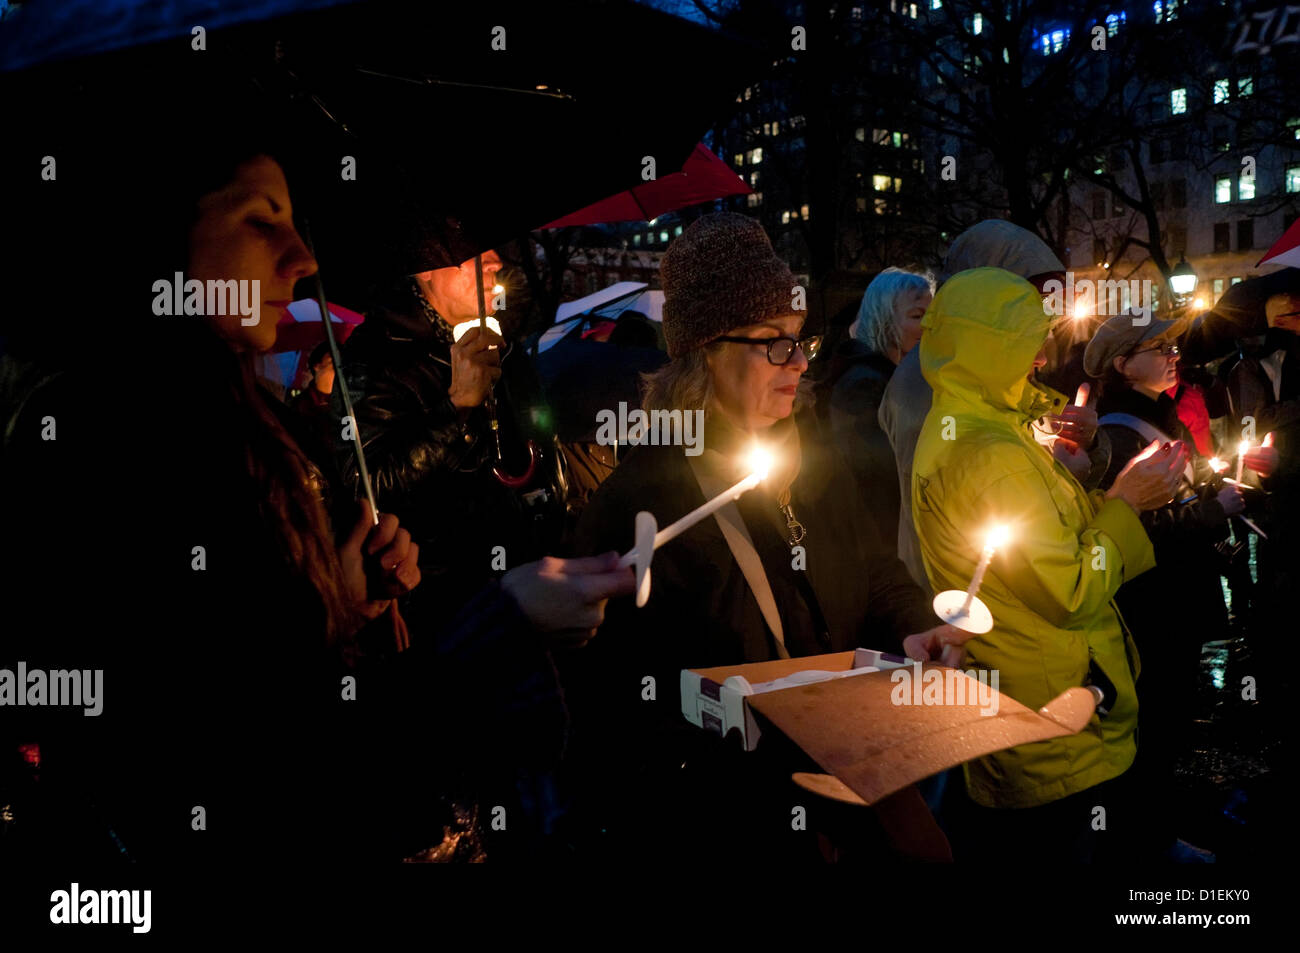 New York, NY -  16 December 2012 New Yorkers gathered in Washington Square Park for a Candlelight vigil to mourn the victims of the Sandy Hook Elementary School Shooting and to call for stronger gun control laws. Stock Photo